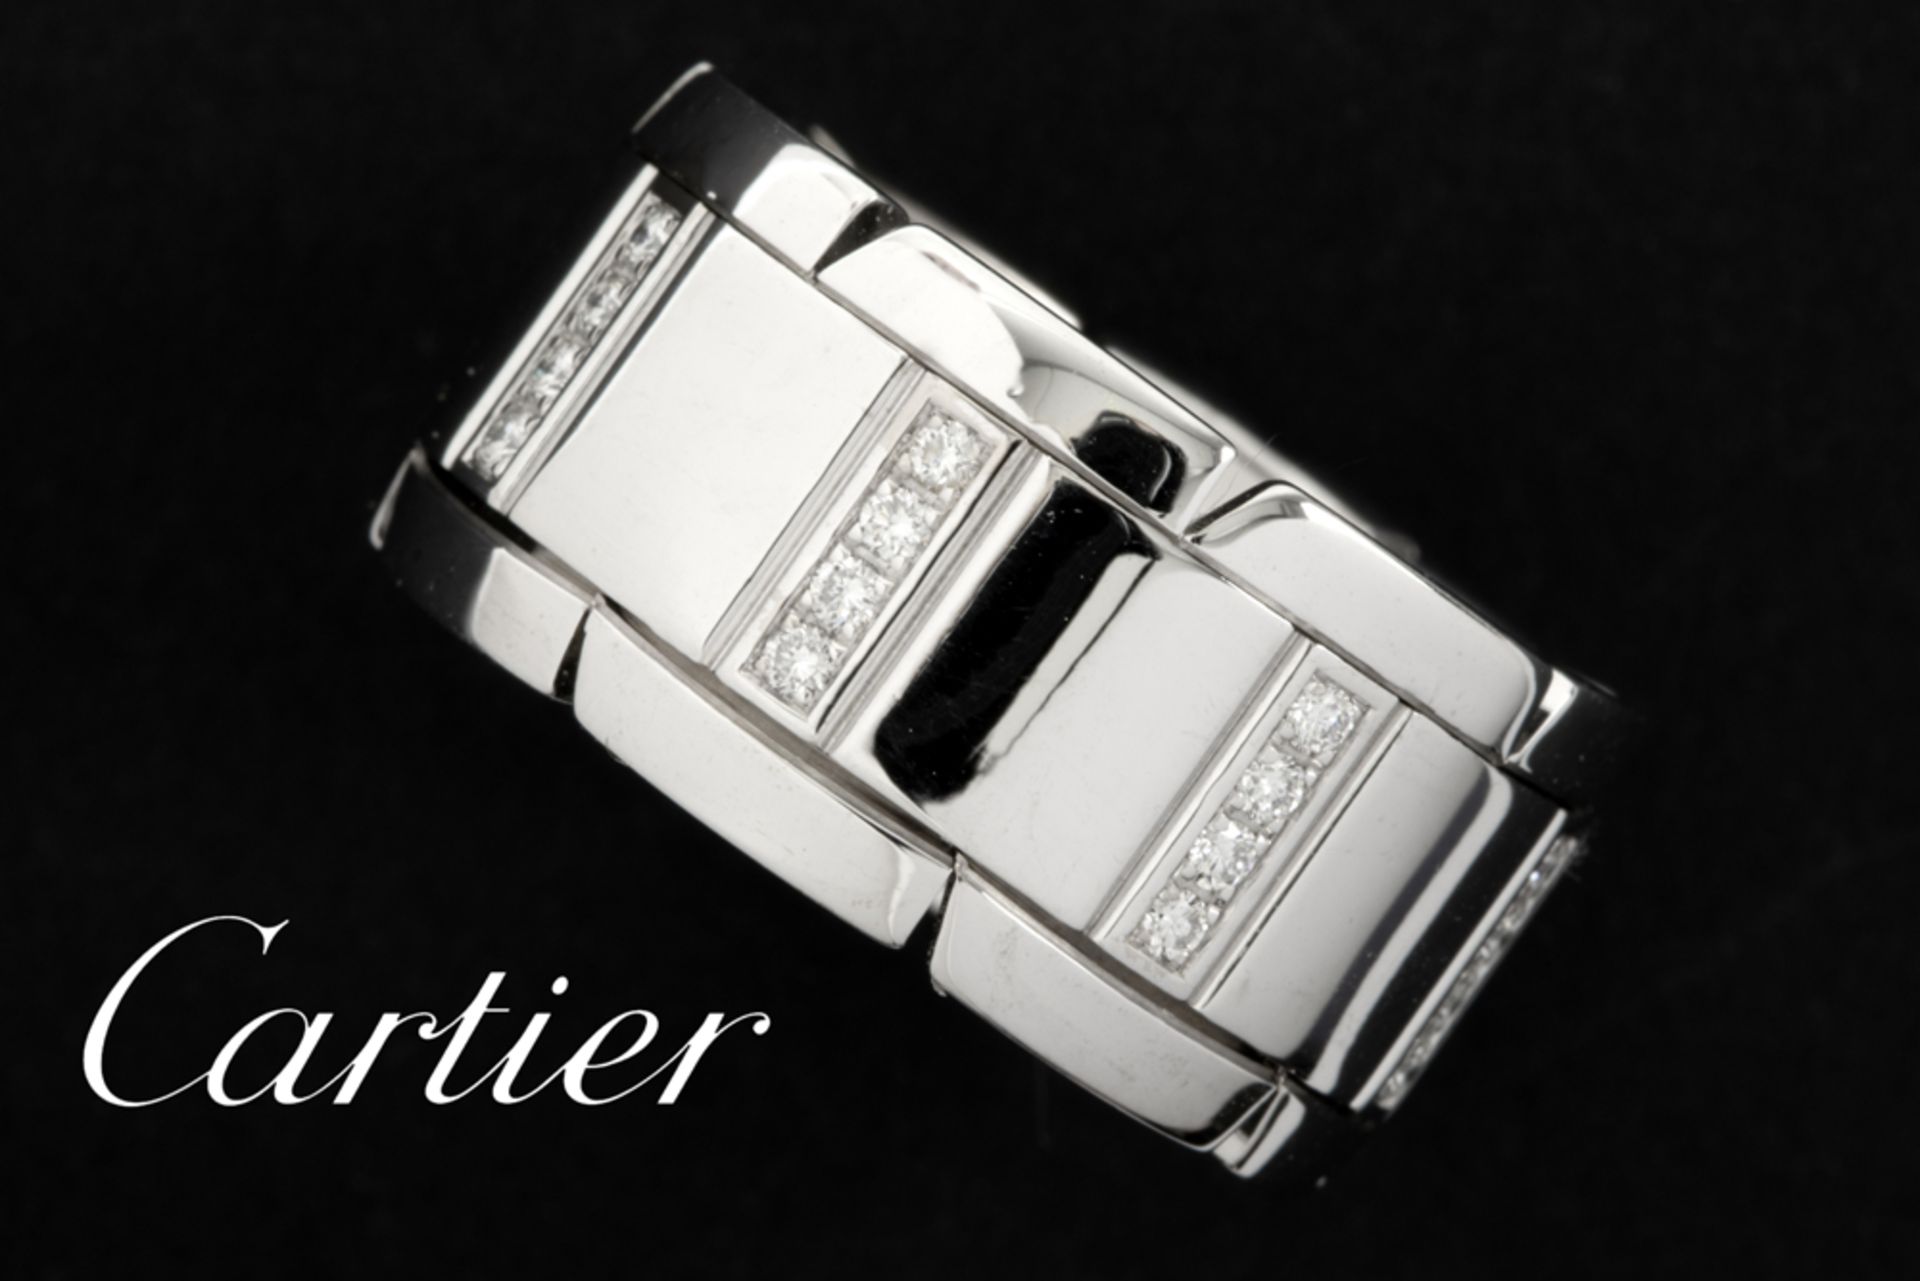 Cartier numbered and marked "Tank" design ring in white gold (18 carat) with 0,32 carat of very high